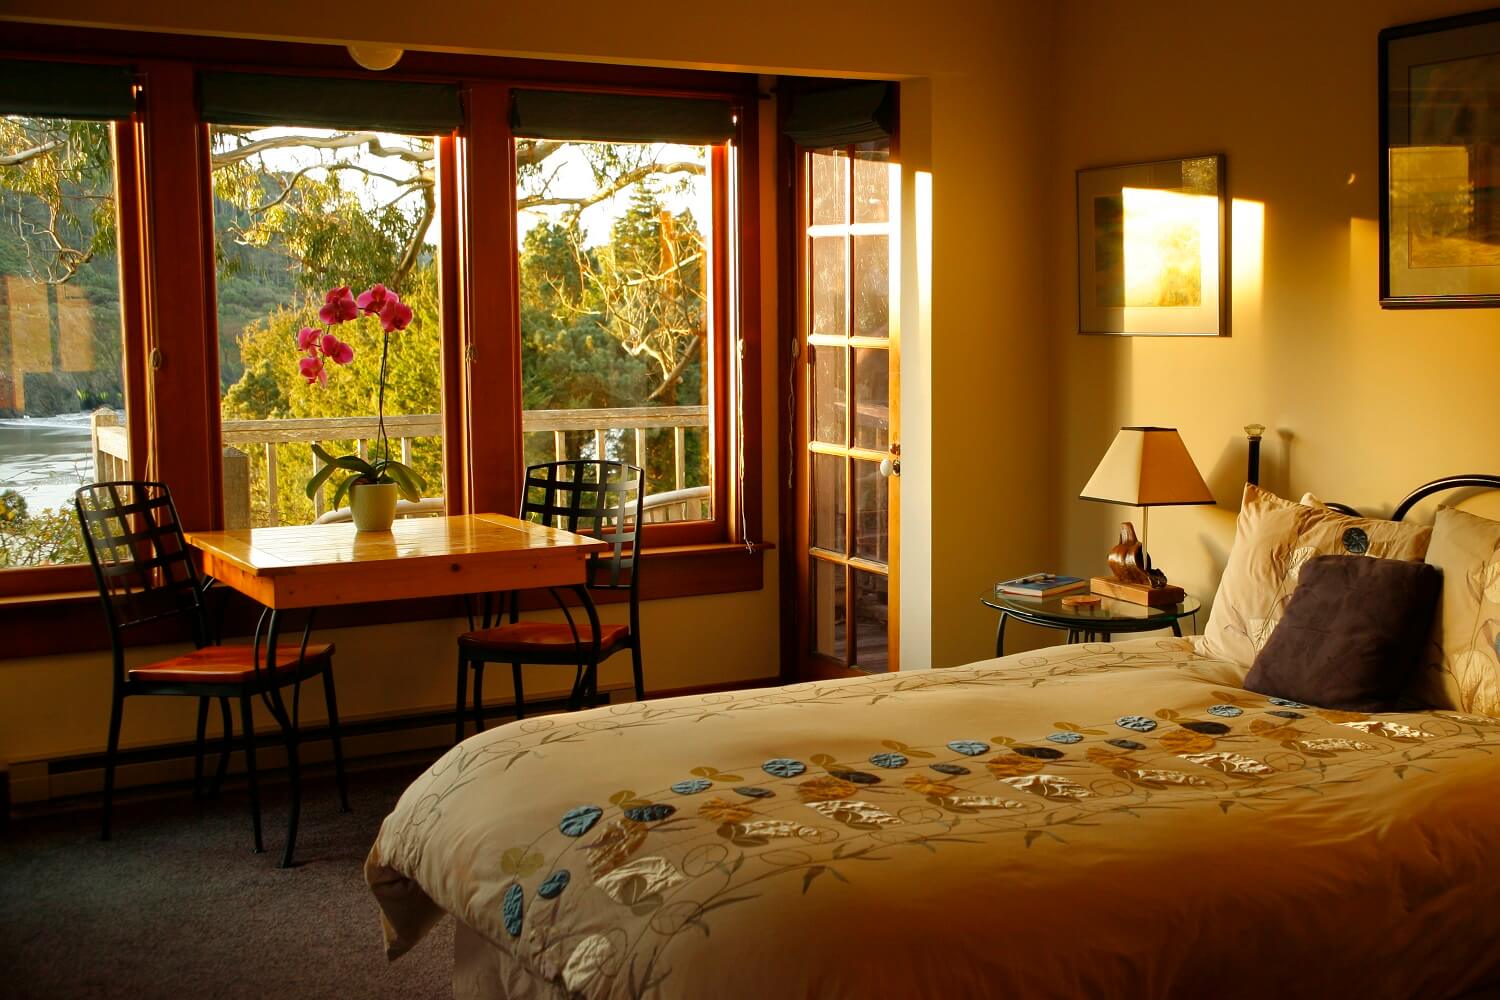 Pacific Room - Bed, nightstand, table with chairs, three windows behind them, door